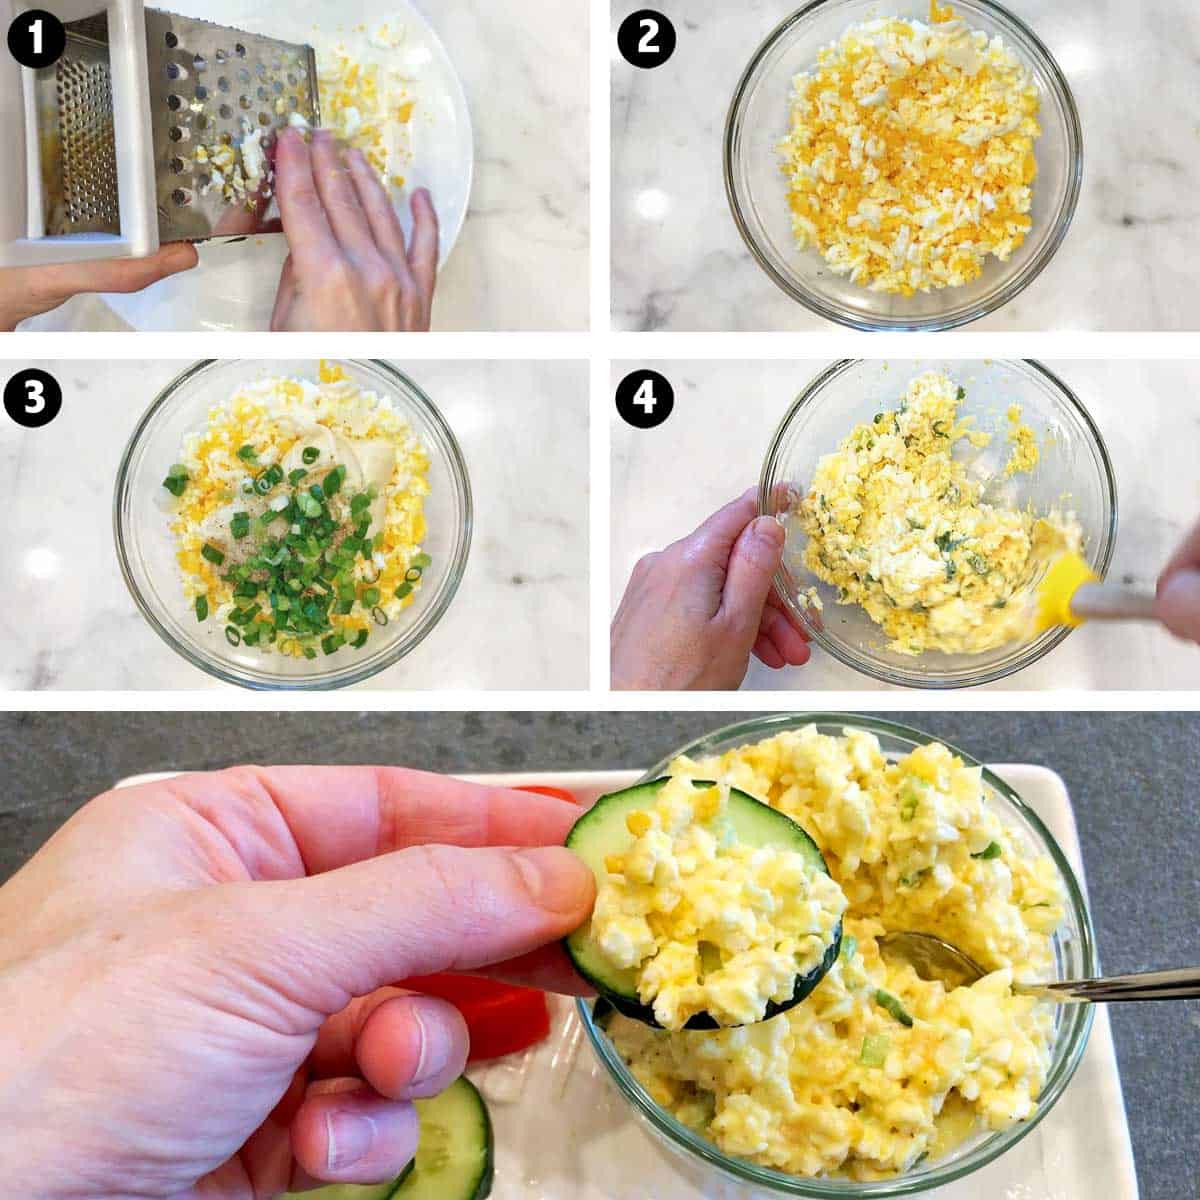 A five-photo collage showing the steps for making a low-carb egg salad. 